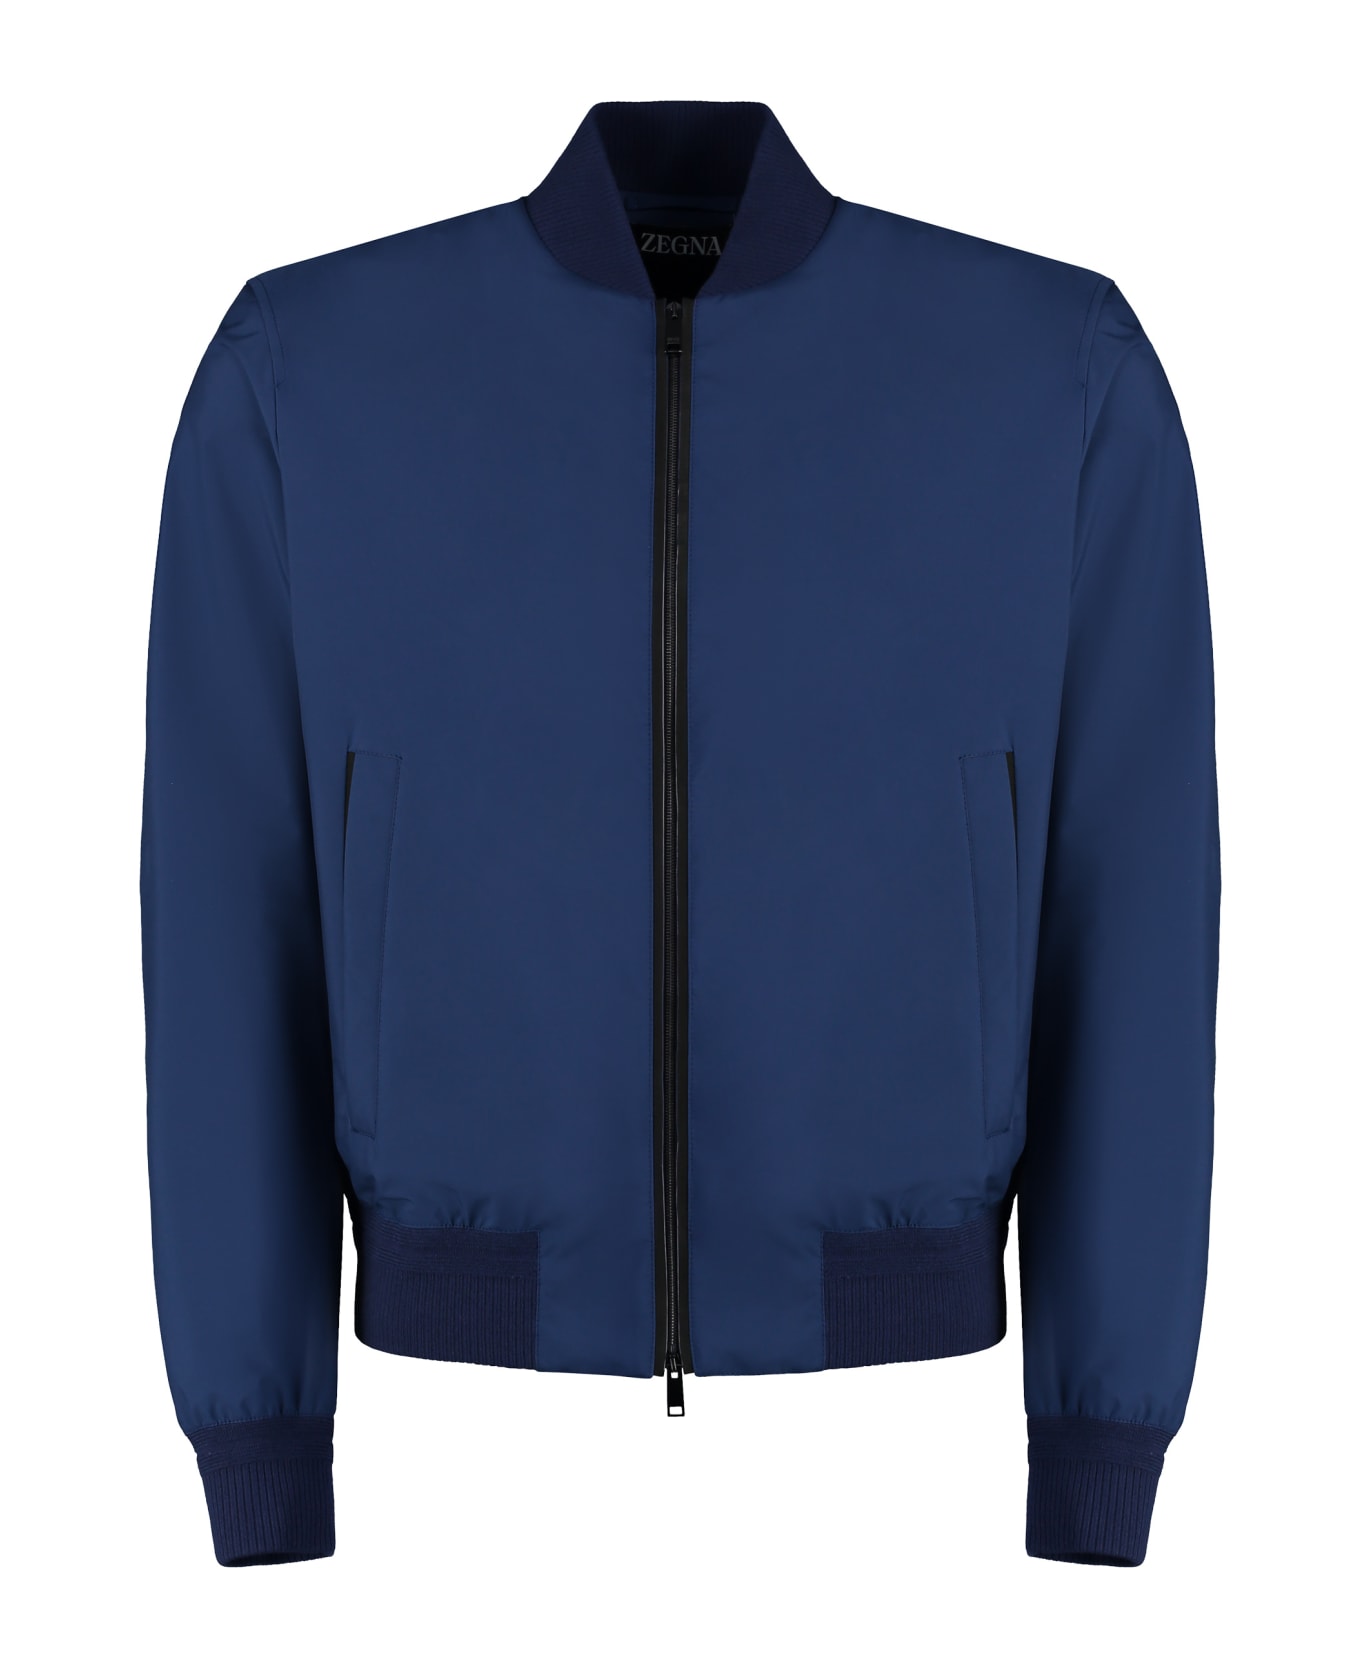 Zegna Bomber Jacket In Technical Fabric - blue